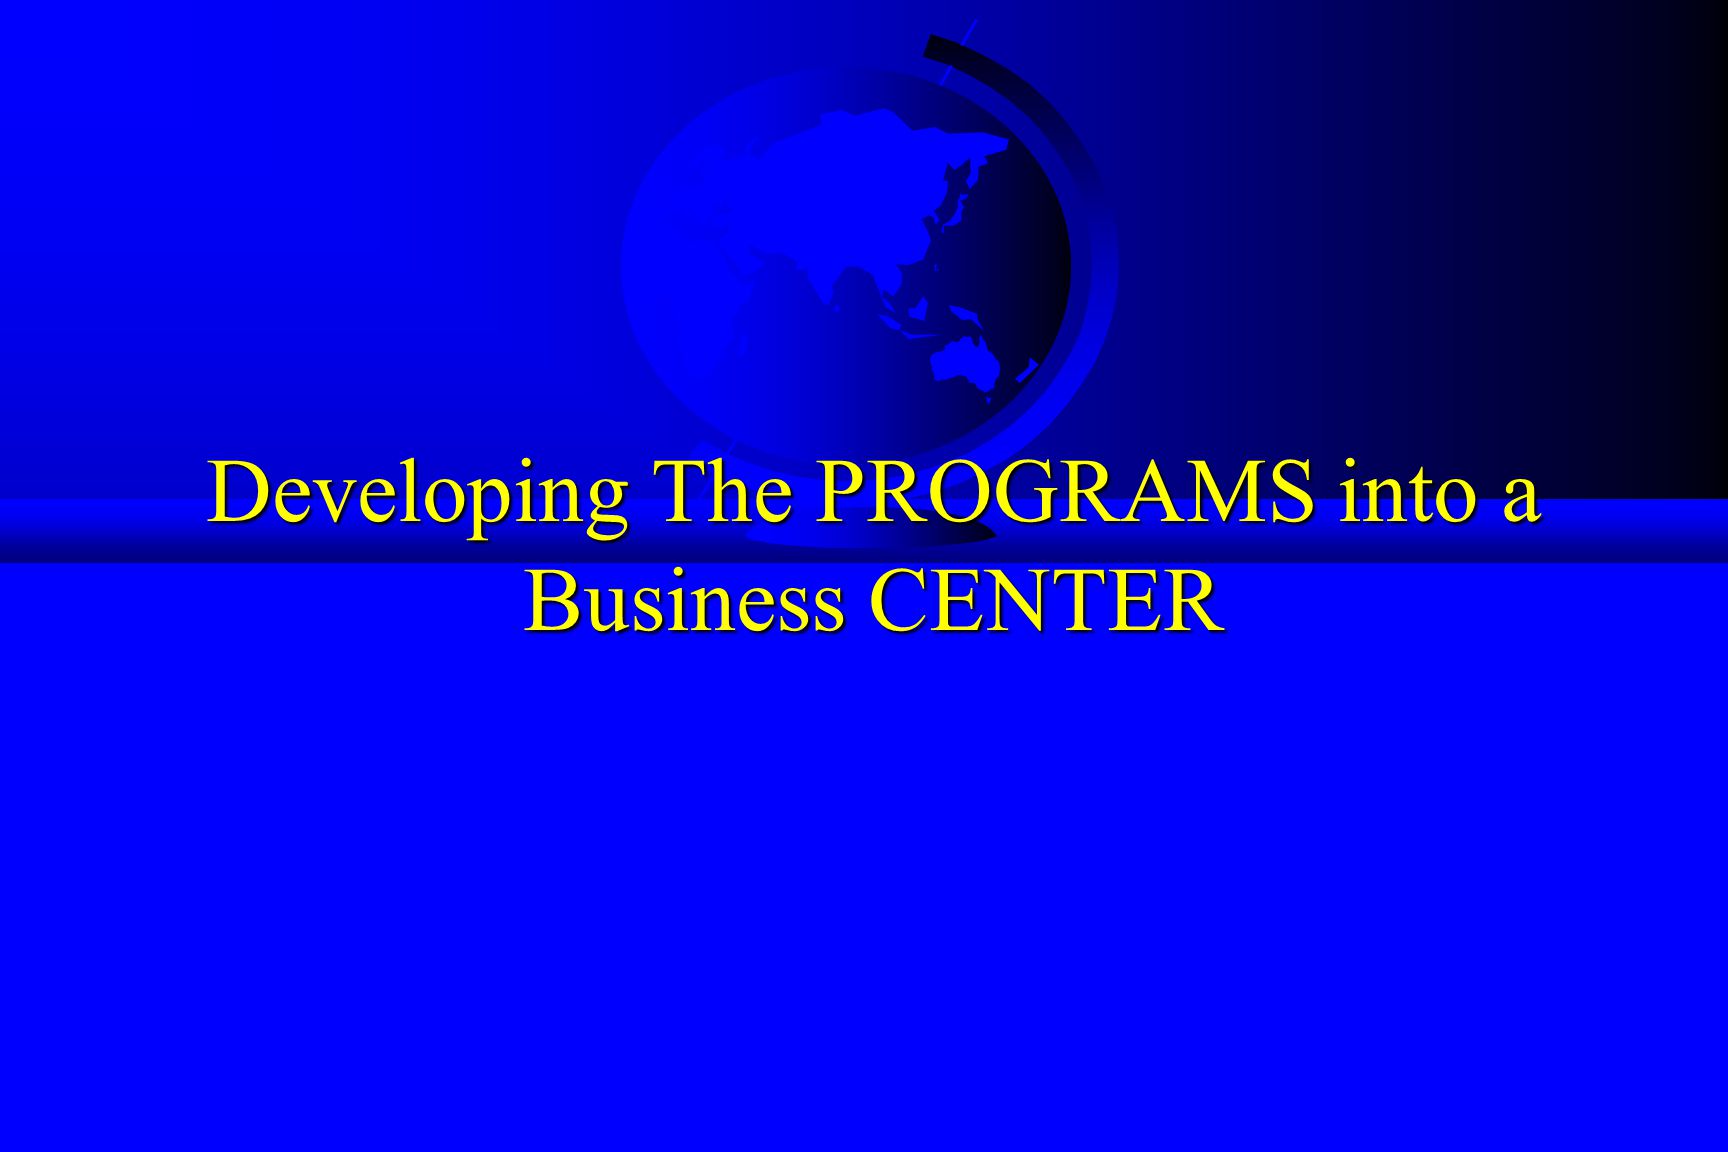 Developing The PROGRAMS into a Business CENTER